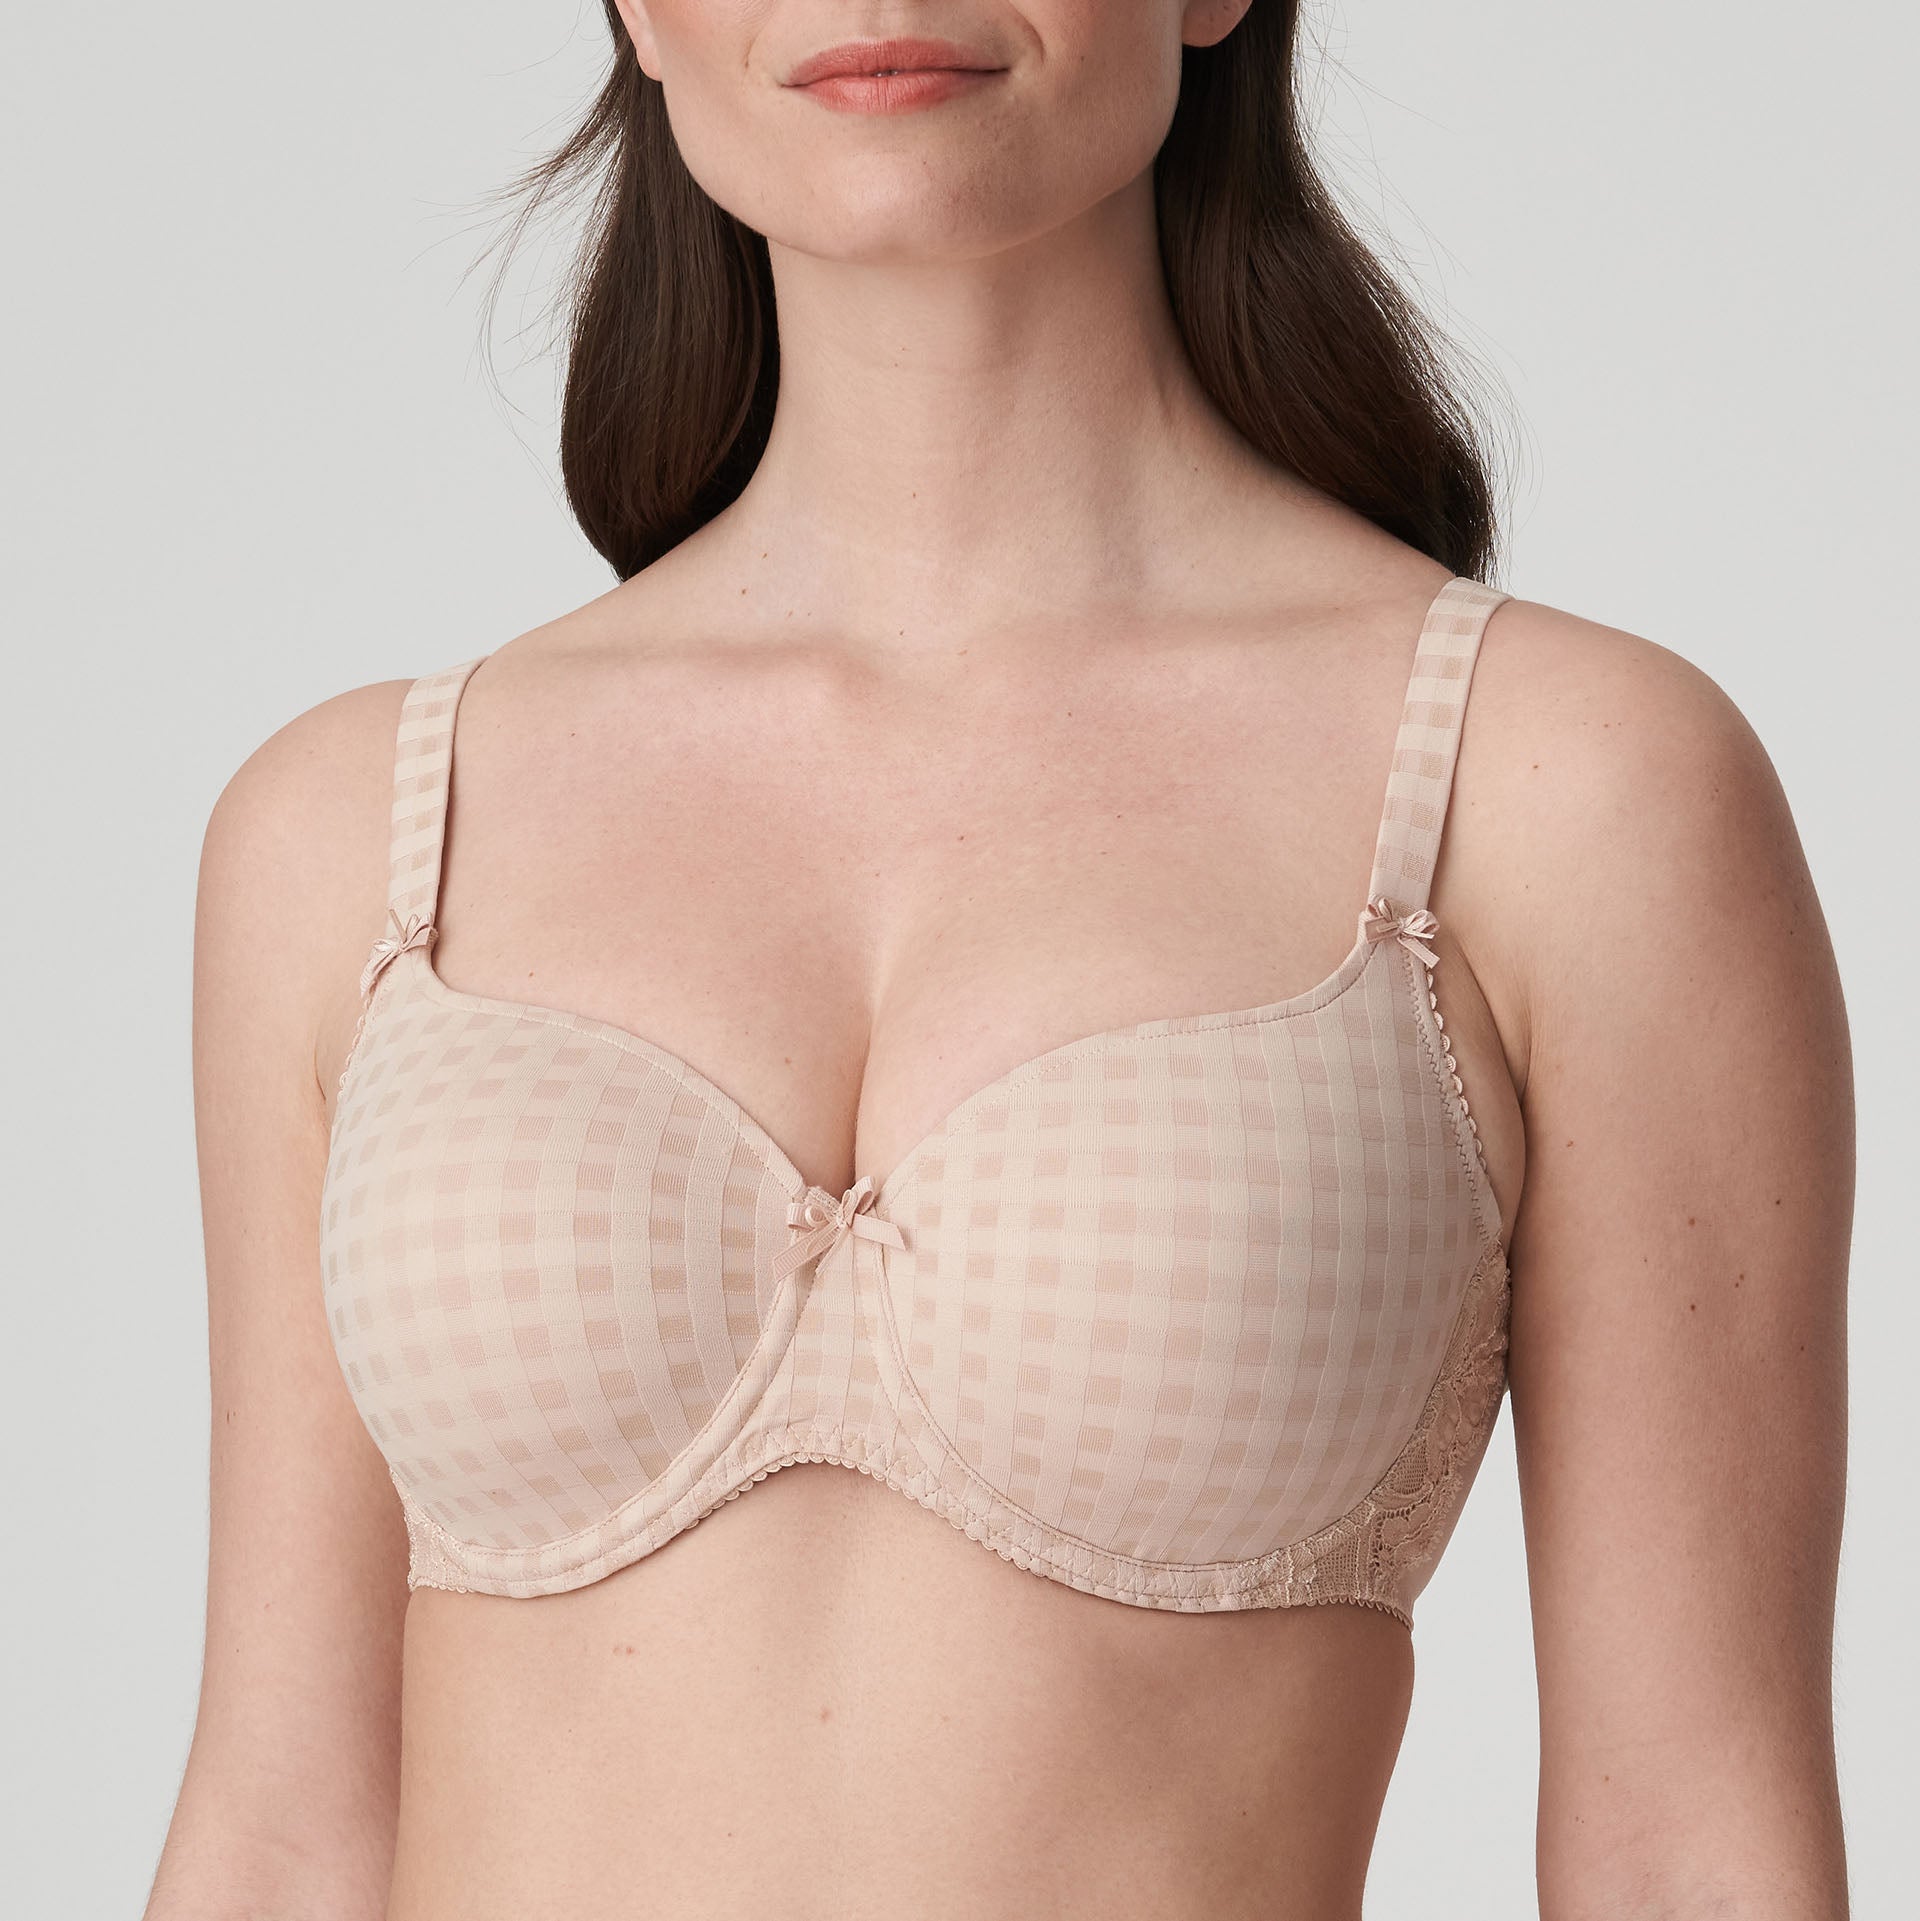 Front view of a woman wearing the DD+ Madison Moulded Cup Bra with light padding in Caffe Latte by Primadonna.